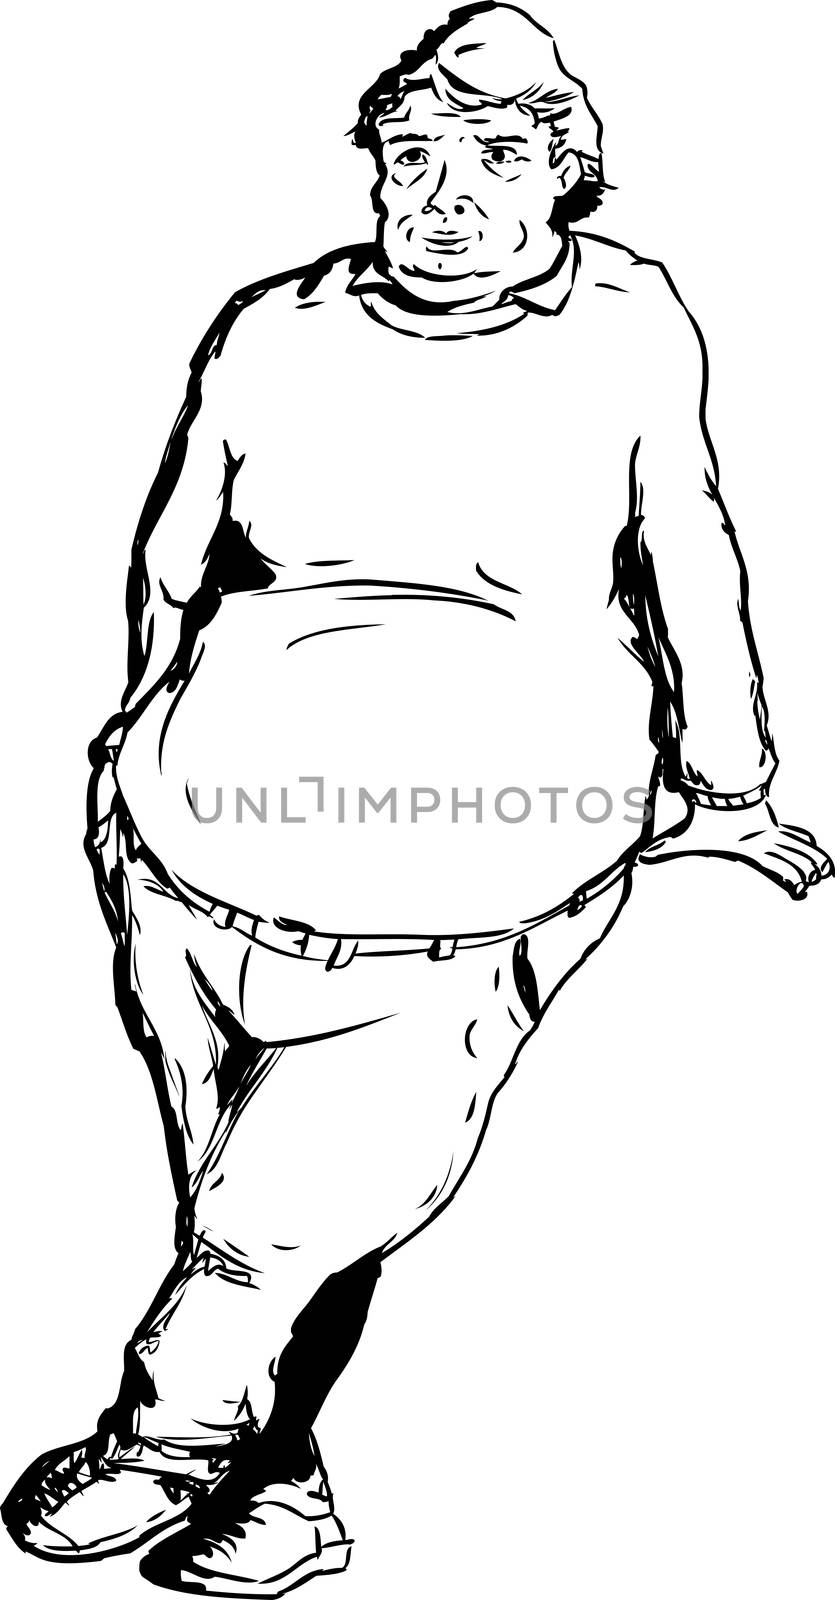 Outlined Male Leaning on Blank Area by TheBlackRhino